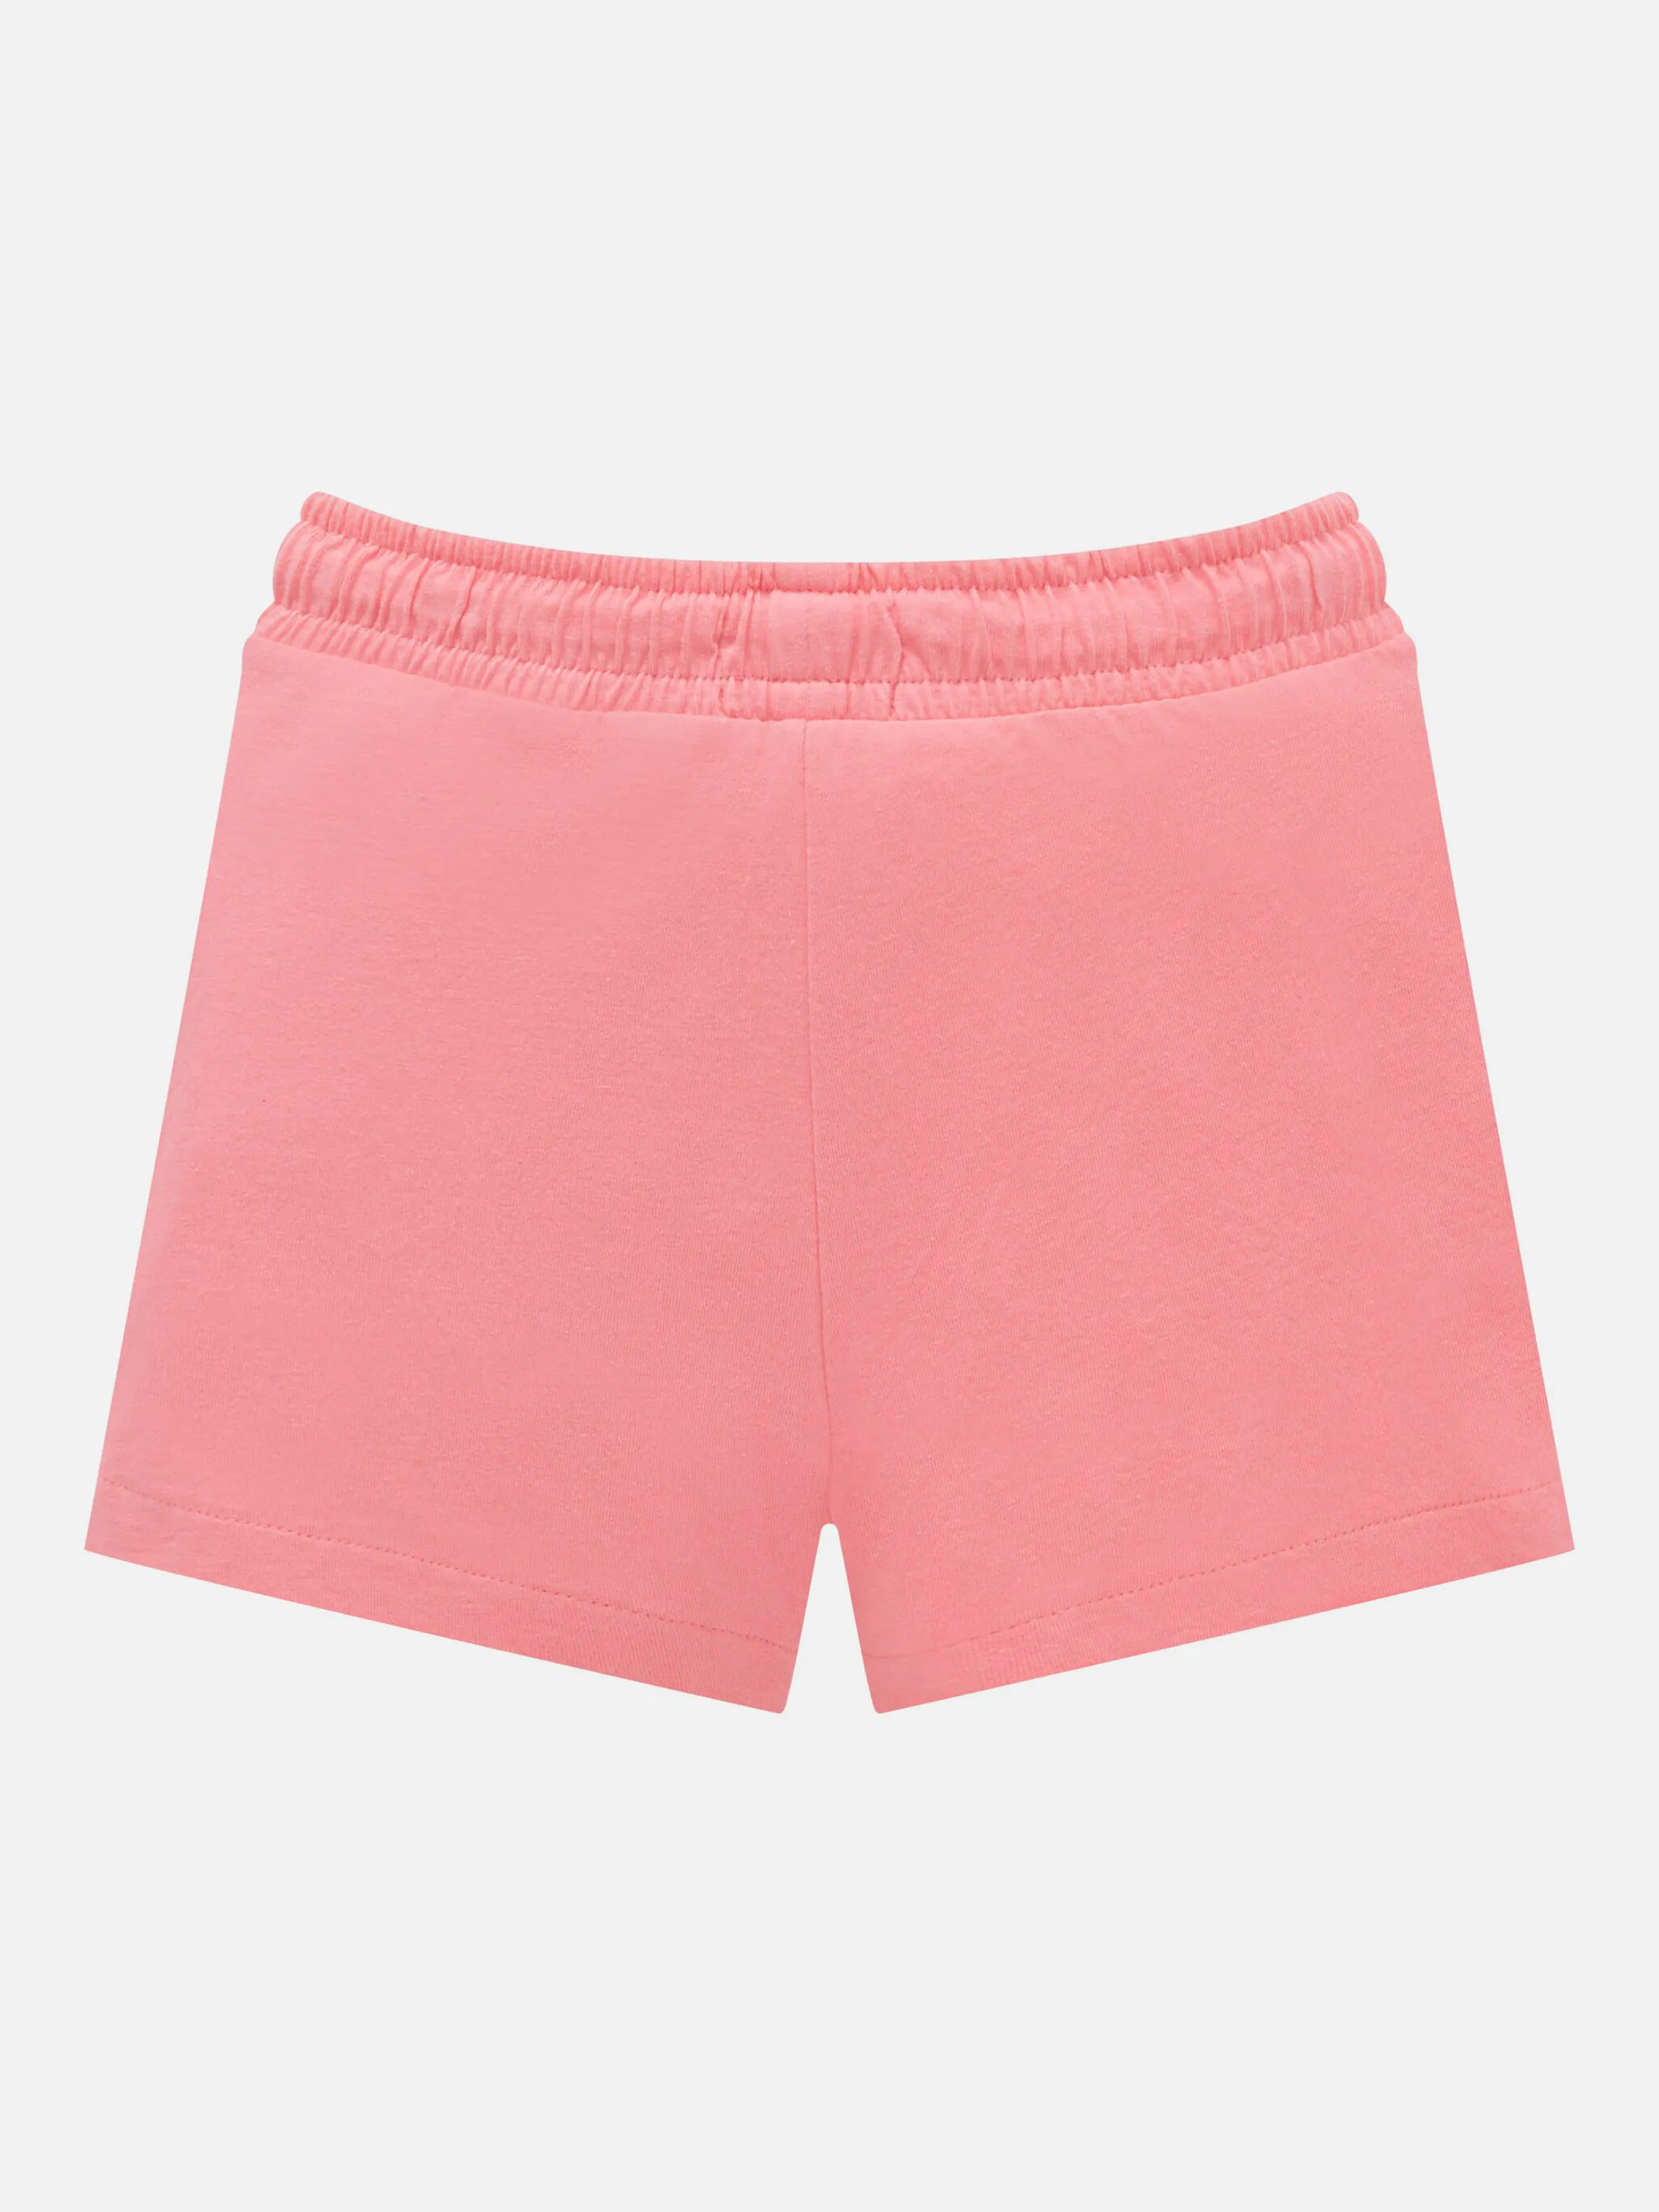 Tom Tailor 1031843 ruffled jersey shorts Pink 865867 23807 2